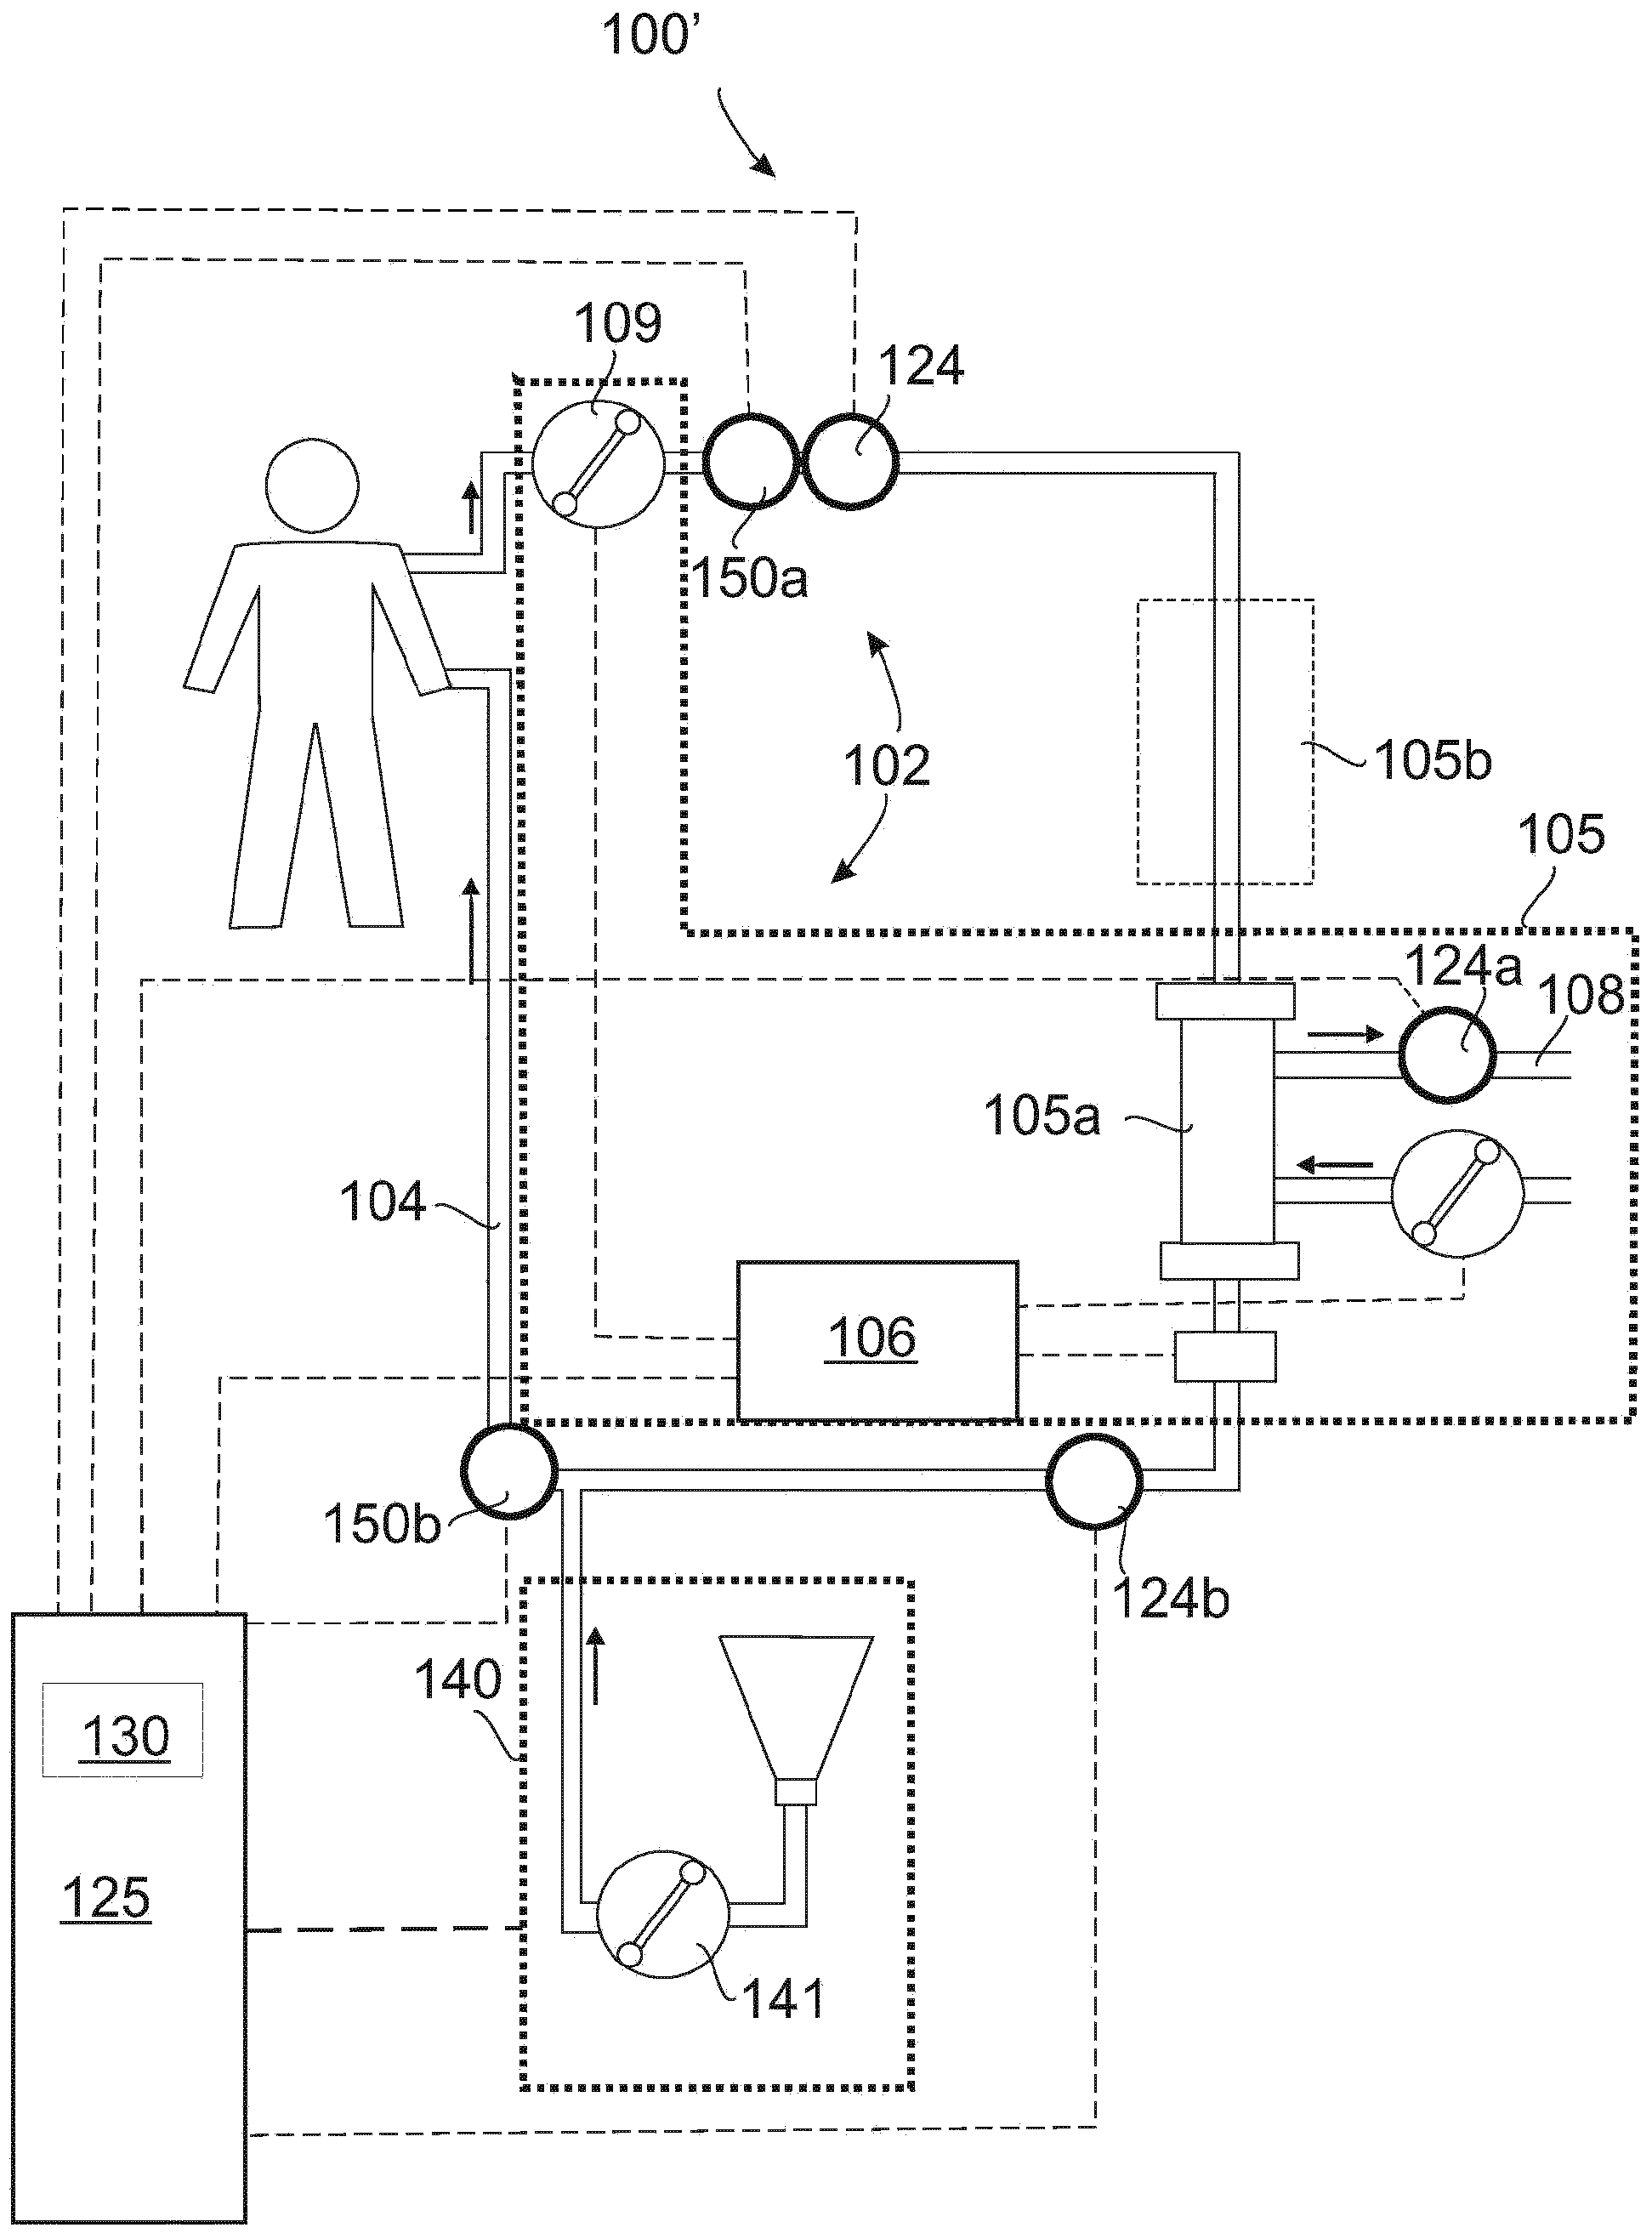 Safety apparatus for extracorporeal blood treatment